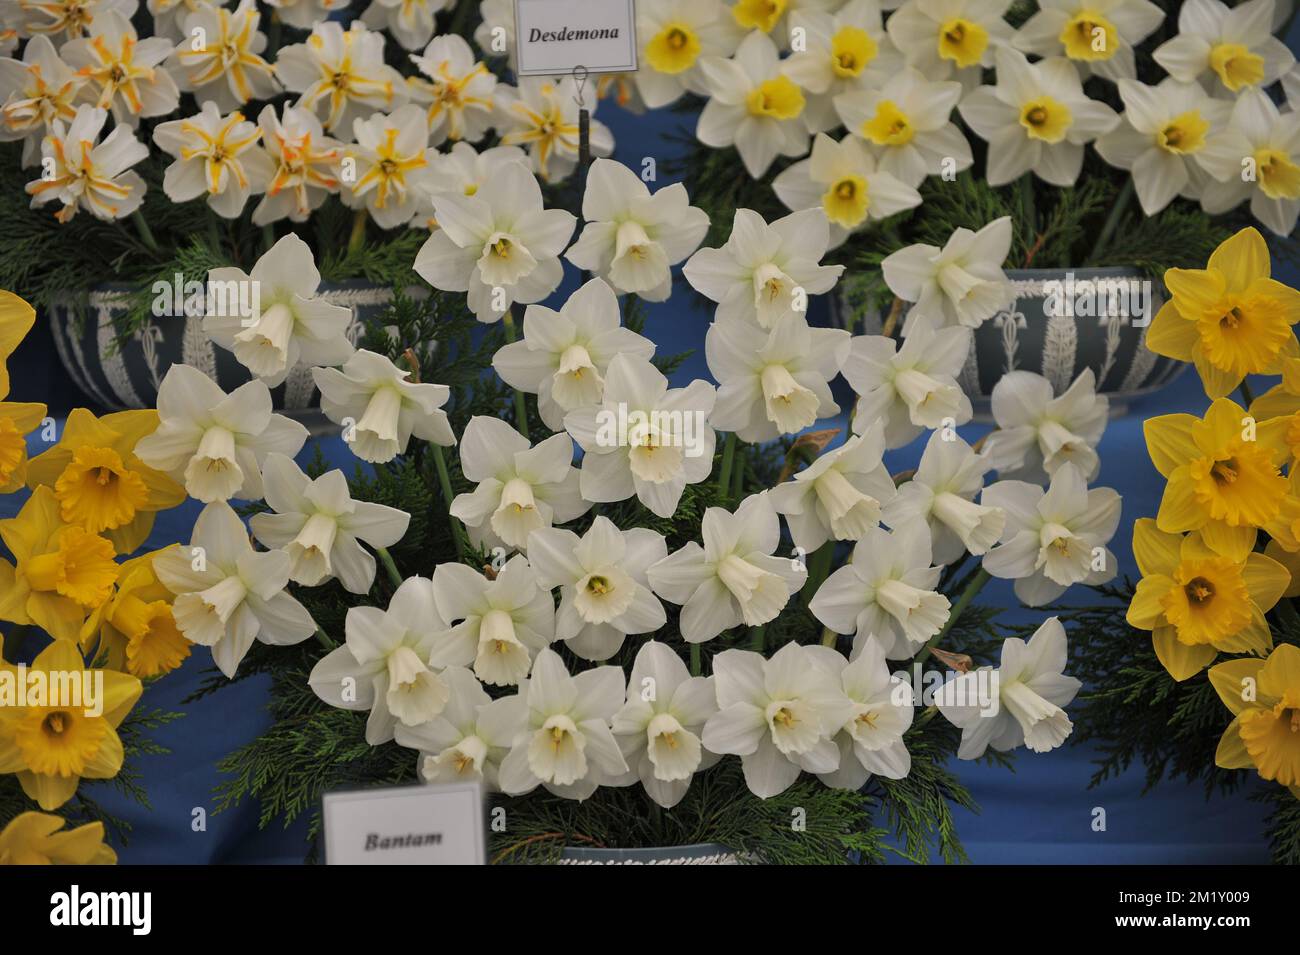 A bouquet of white Large-Cupped daffodils (Narcissus) Desdemona on an exhibition in May Stock Photo